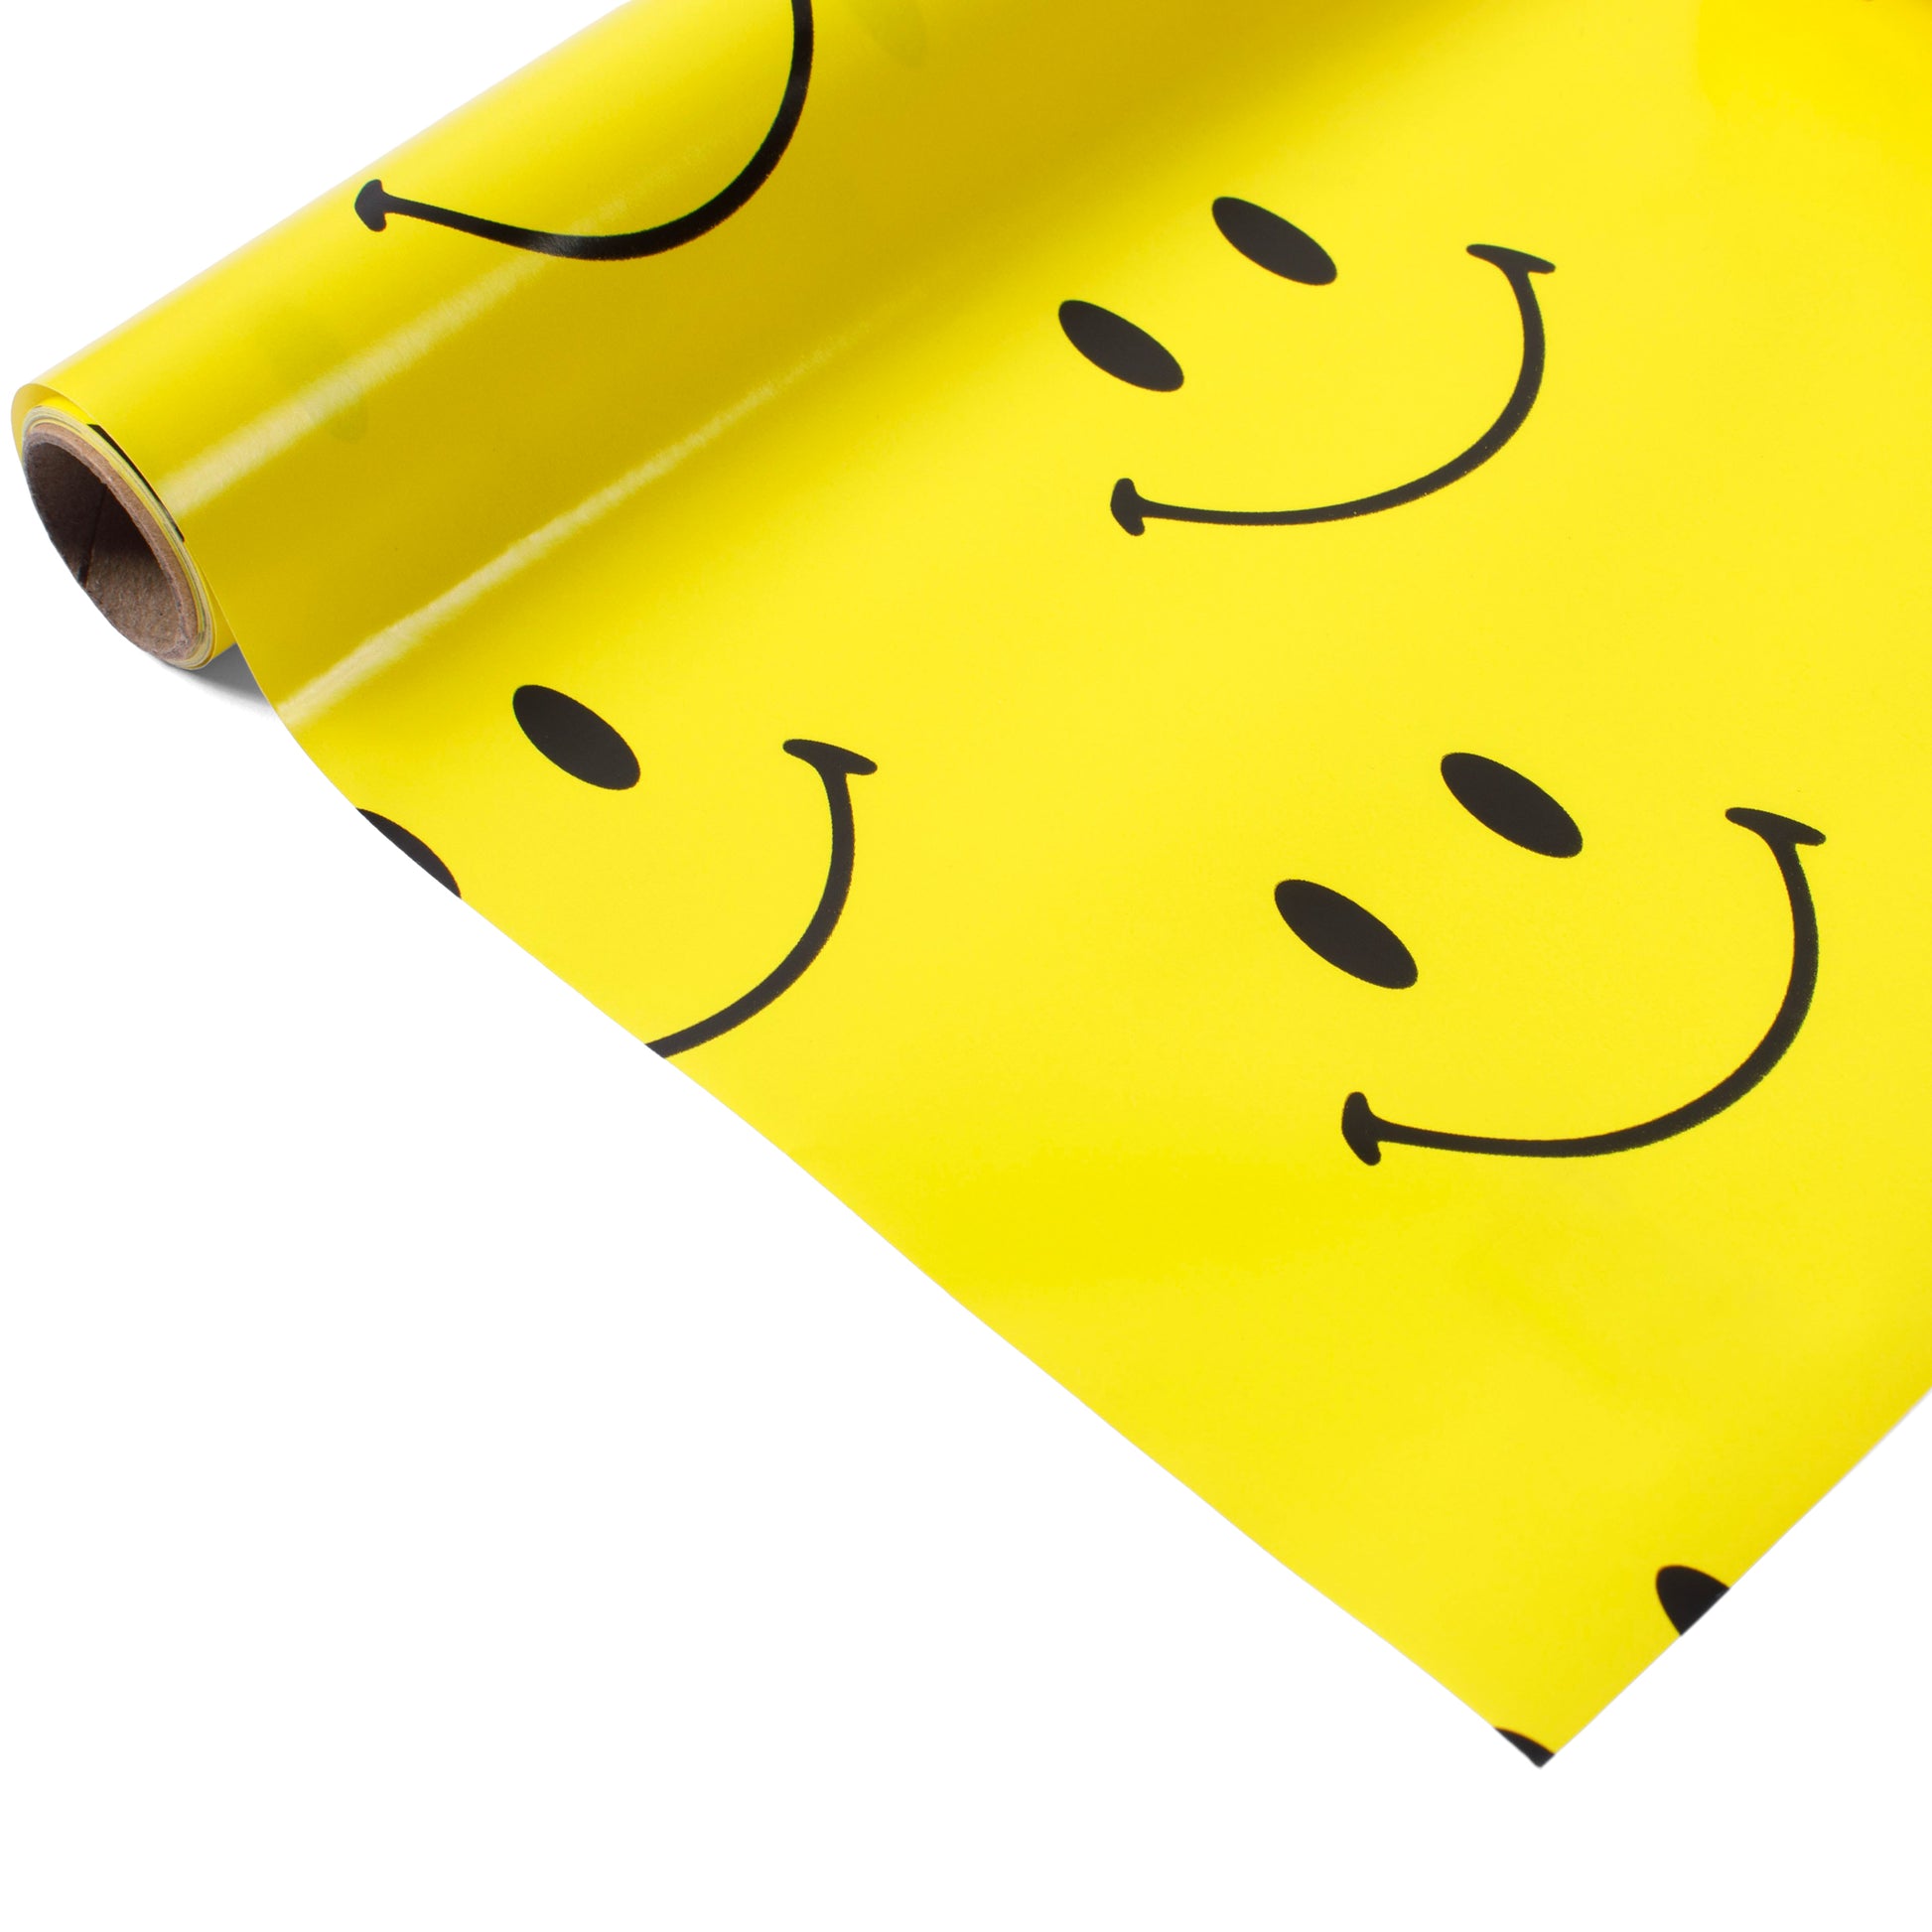 MARKET clothing brand SMILEY GIFT WRAPPING PAPER 3 PACK. Find more homegoods and graphic tees at MarketStudios.com. Formally Chinatown Market. 